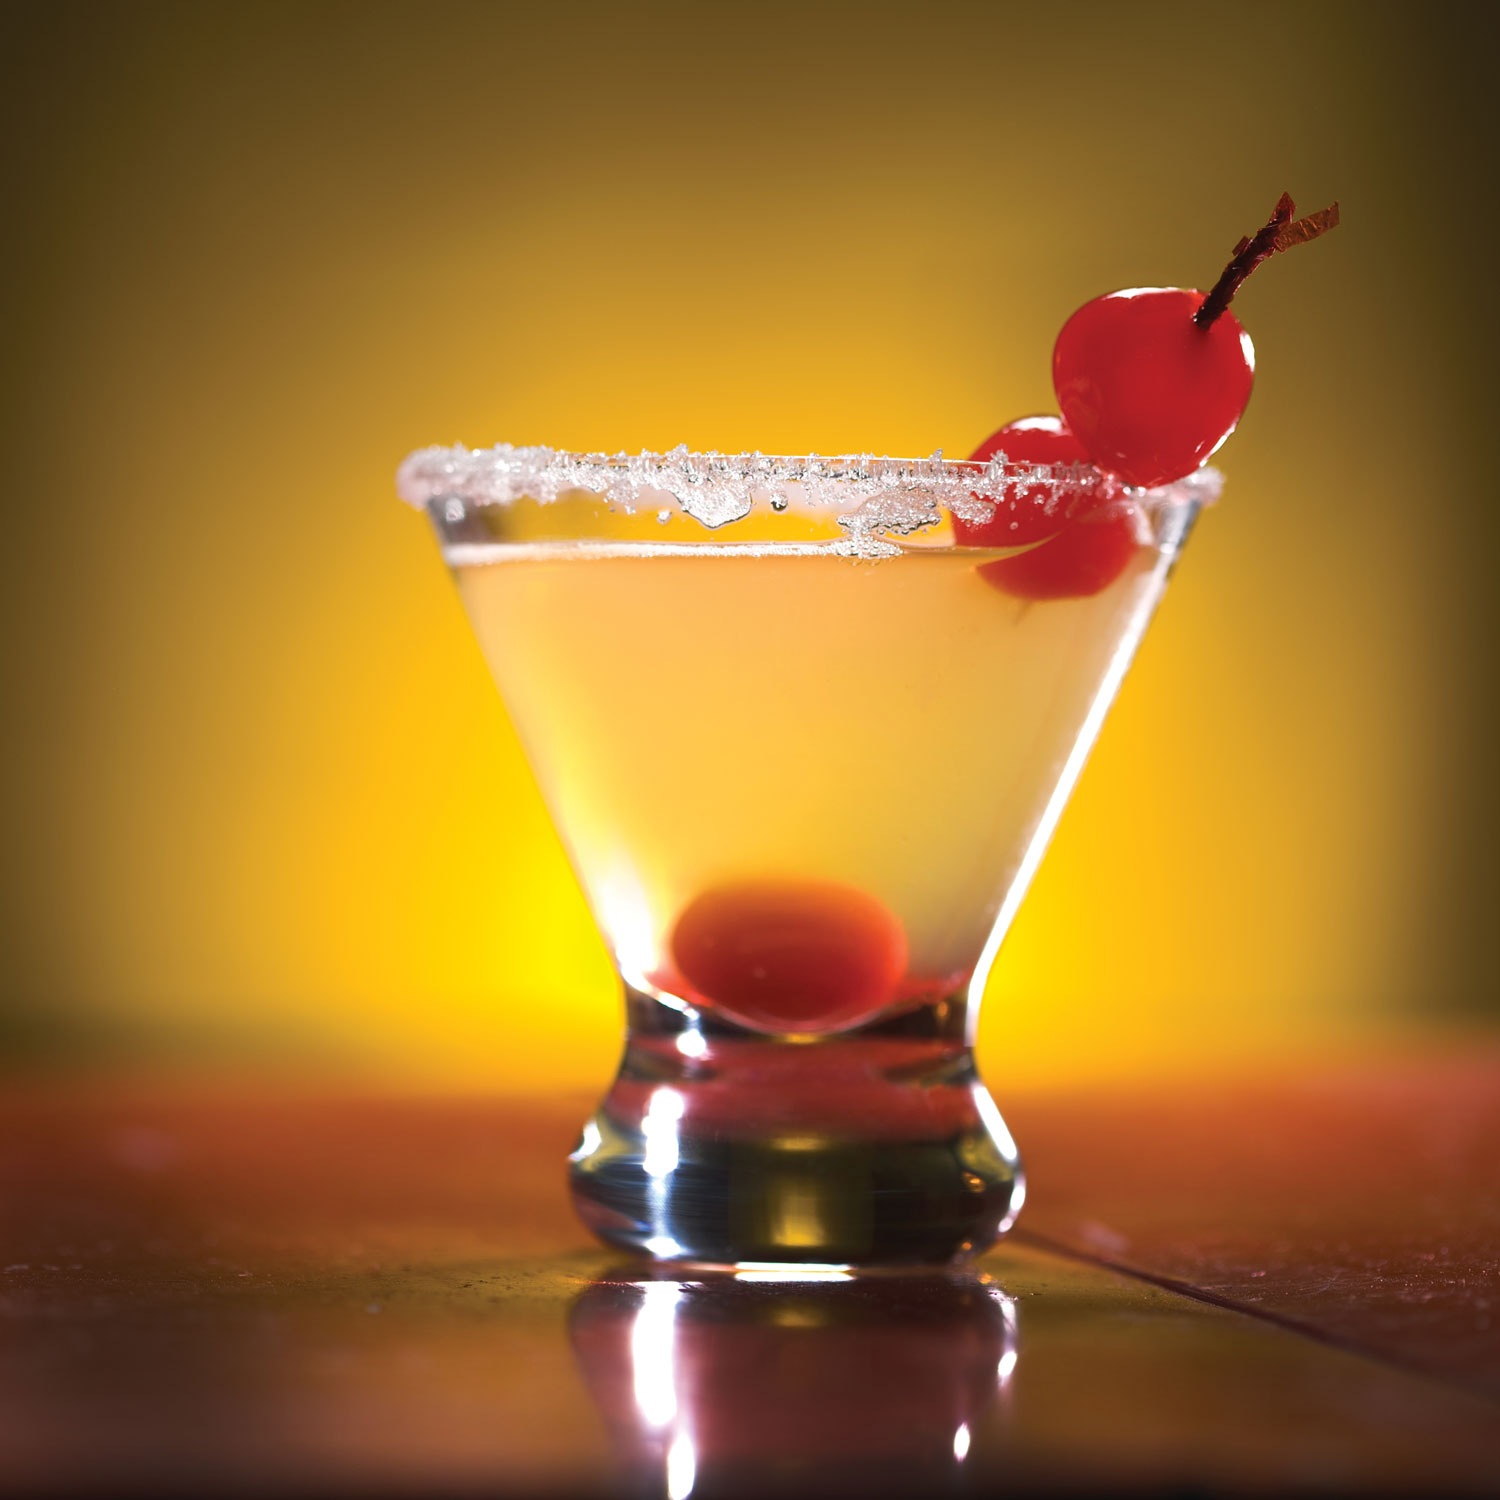 food and beverage photography